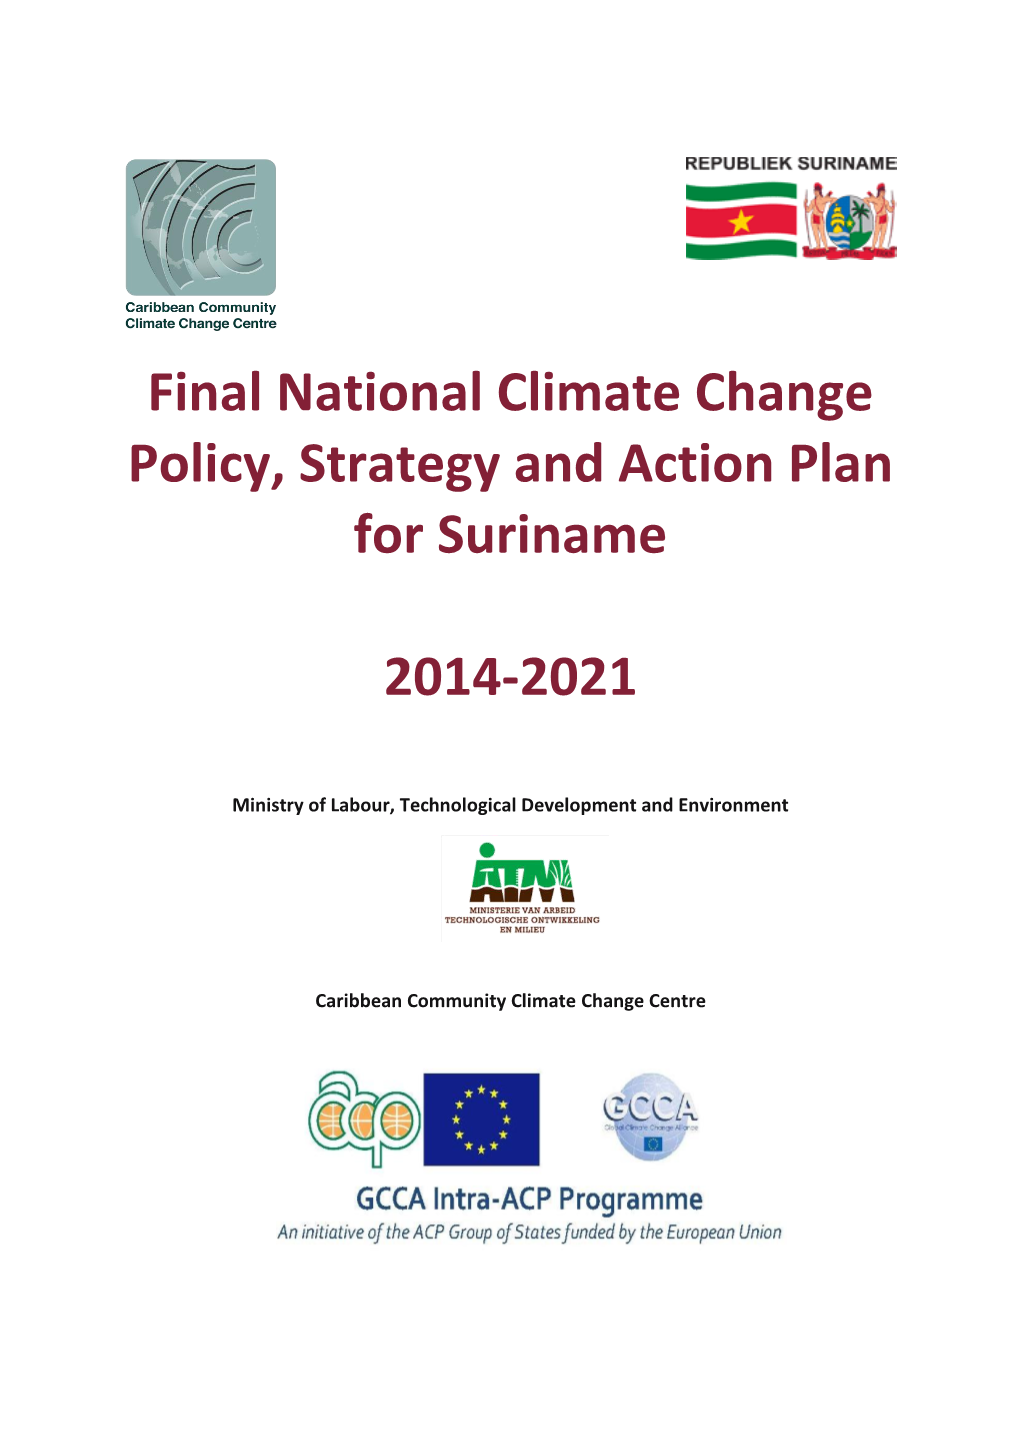 Final National Climate Change Policy, Strategy and Action Plan for Suriname